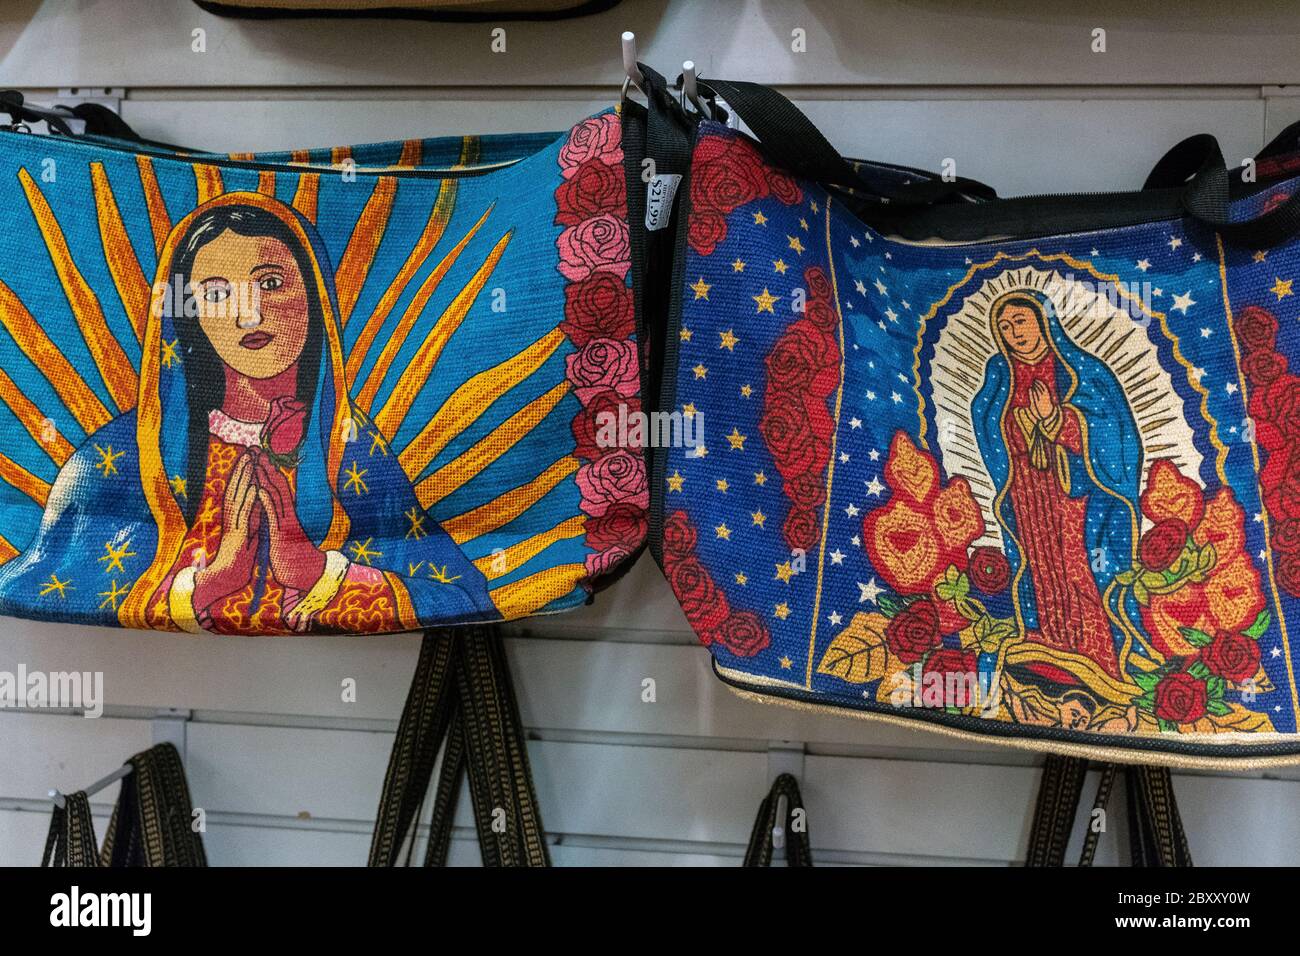 shoulder bags with depictions of the 'Virgin Mary' for sale in Old Town Albuquerque, New Mexico Stock Photo